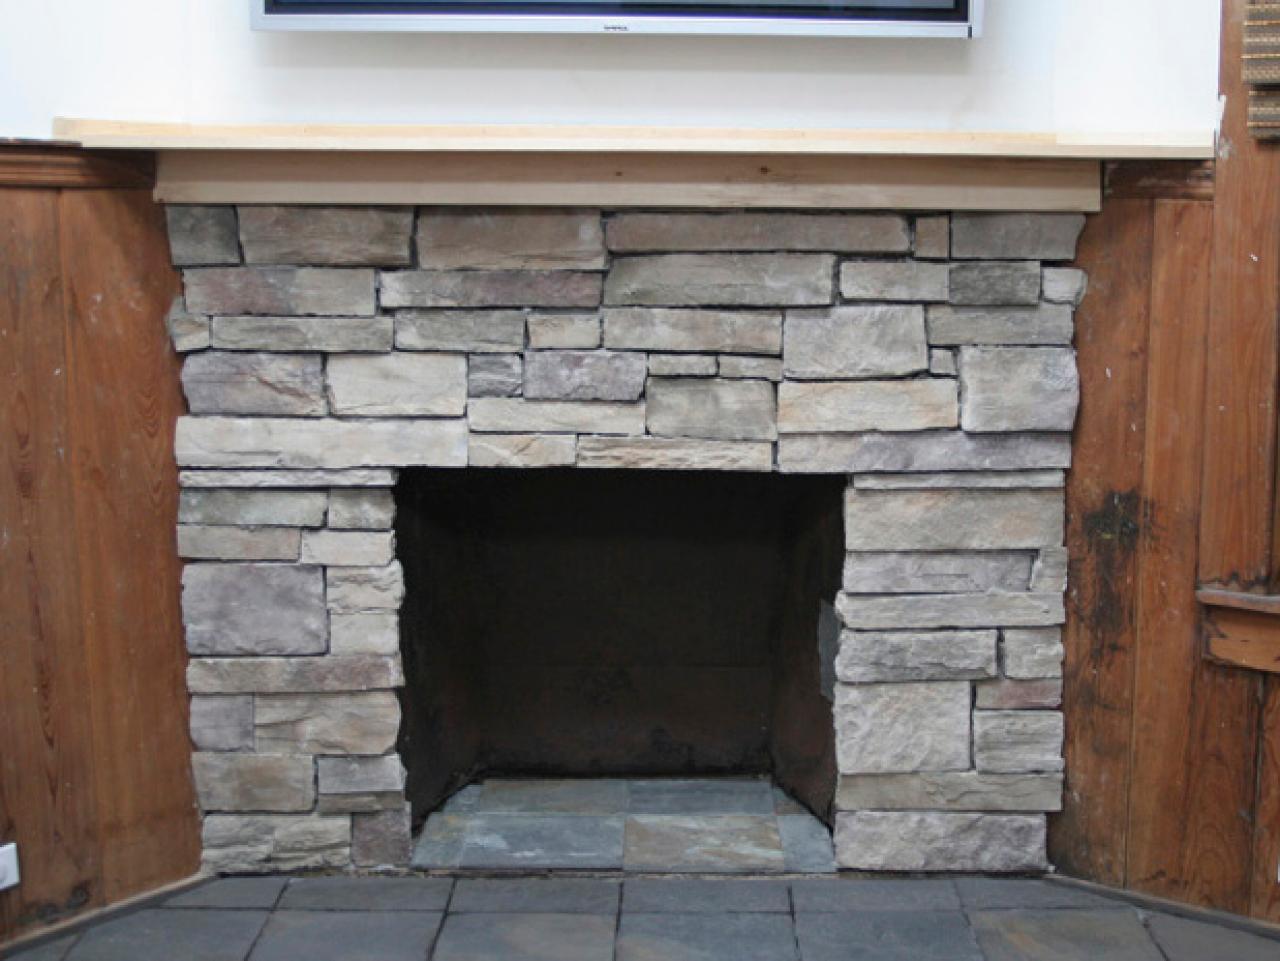 Brick Fireplace With Stone, How To Reface A Fireplace Surround And Hearth